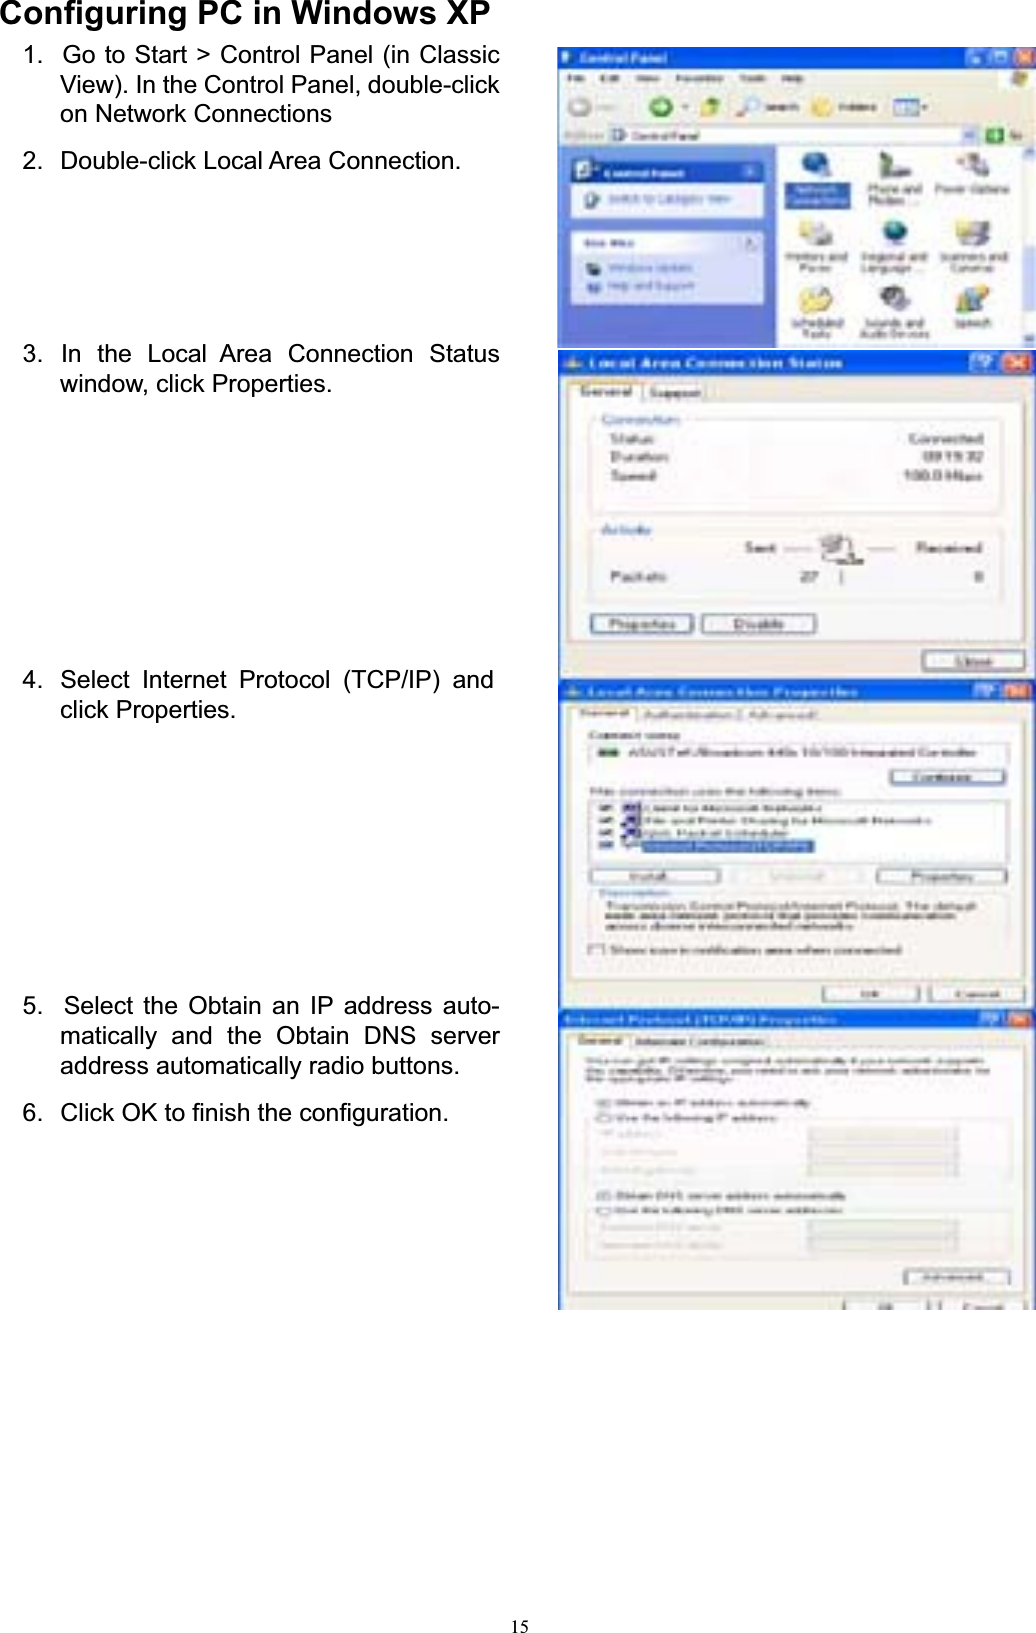 15Configuring PC in Windows XP1.  Go to Start &gt; Control Panel (in Classic View). In the Control Panel, double-click on Network Connections 2.  Double-click Local Area Connection. 3.  In  the  Local  Area  Connection  Status window, click Properties. 4.  Select Internet Protocol (TCP/IP) and click Properties. 5.  Select the Obtain an IP address auto- matically and the Obtain DNS server address automatically radio buttons. 6.  Click OK to finish the configuration. 